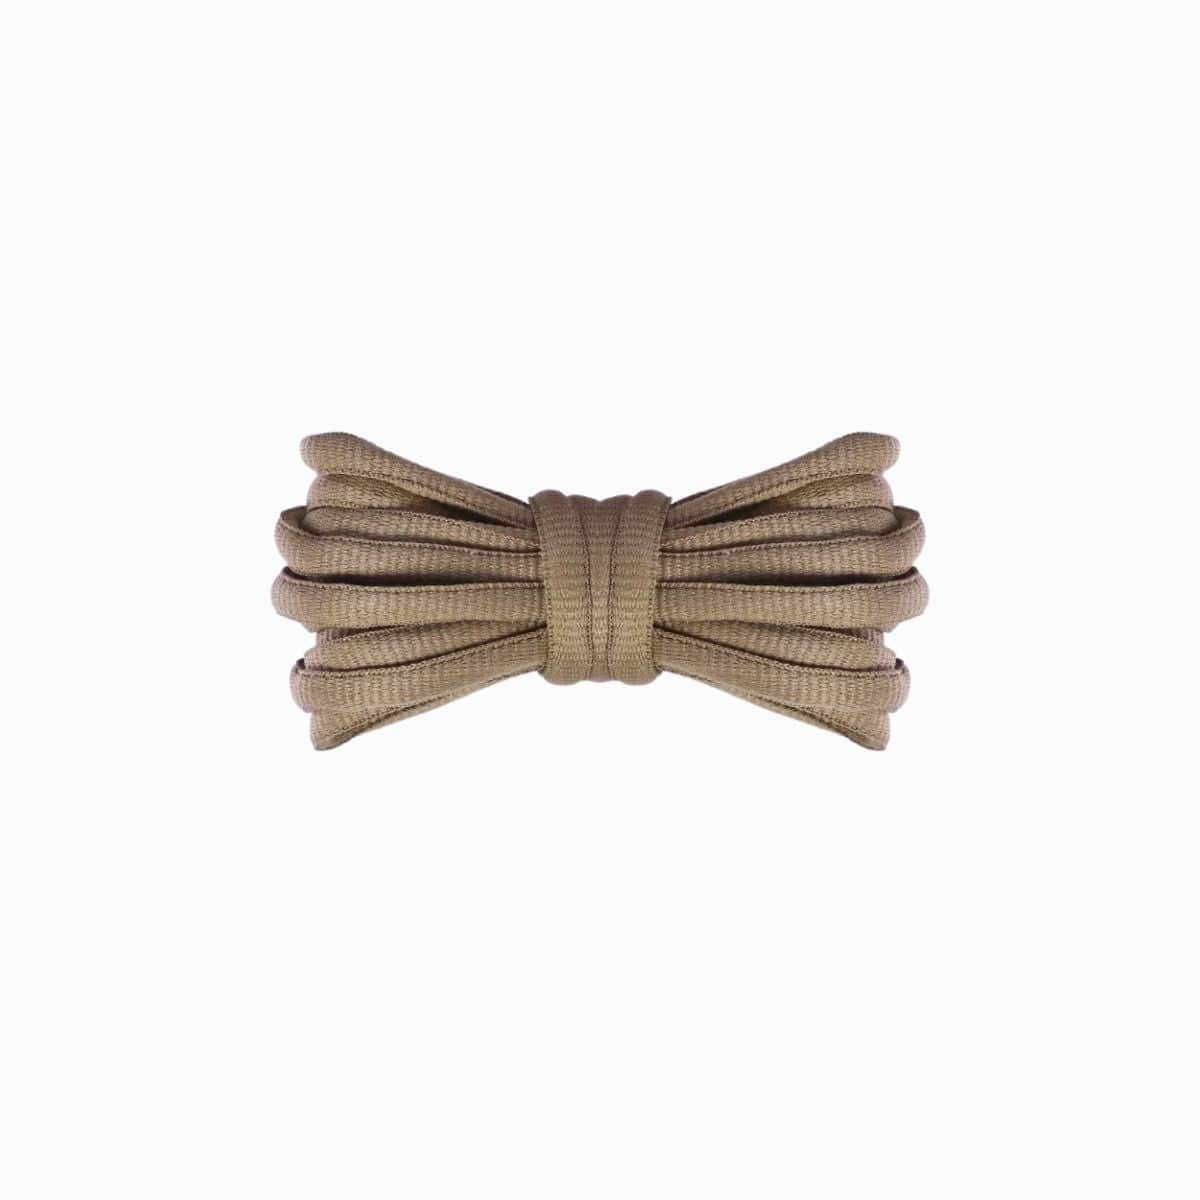 Brown Replacement Adidas Shoe Laces for Adidas Spezial Sneakers by Kicks Shoelaces